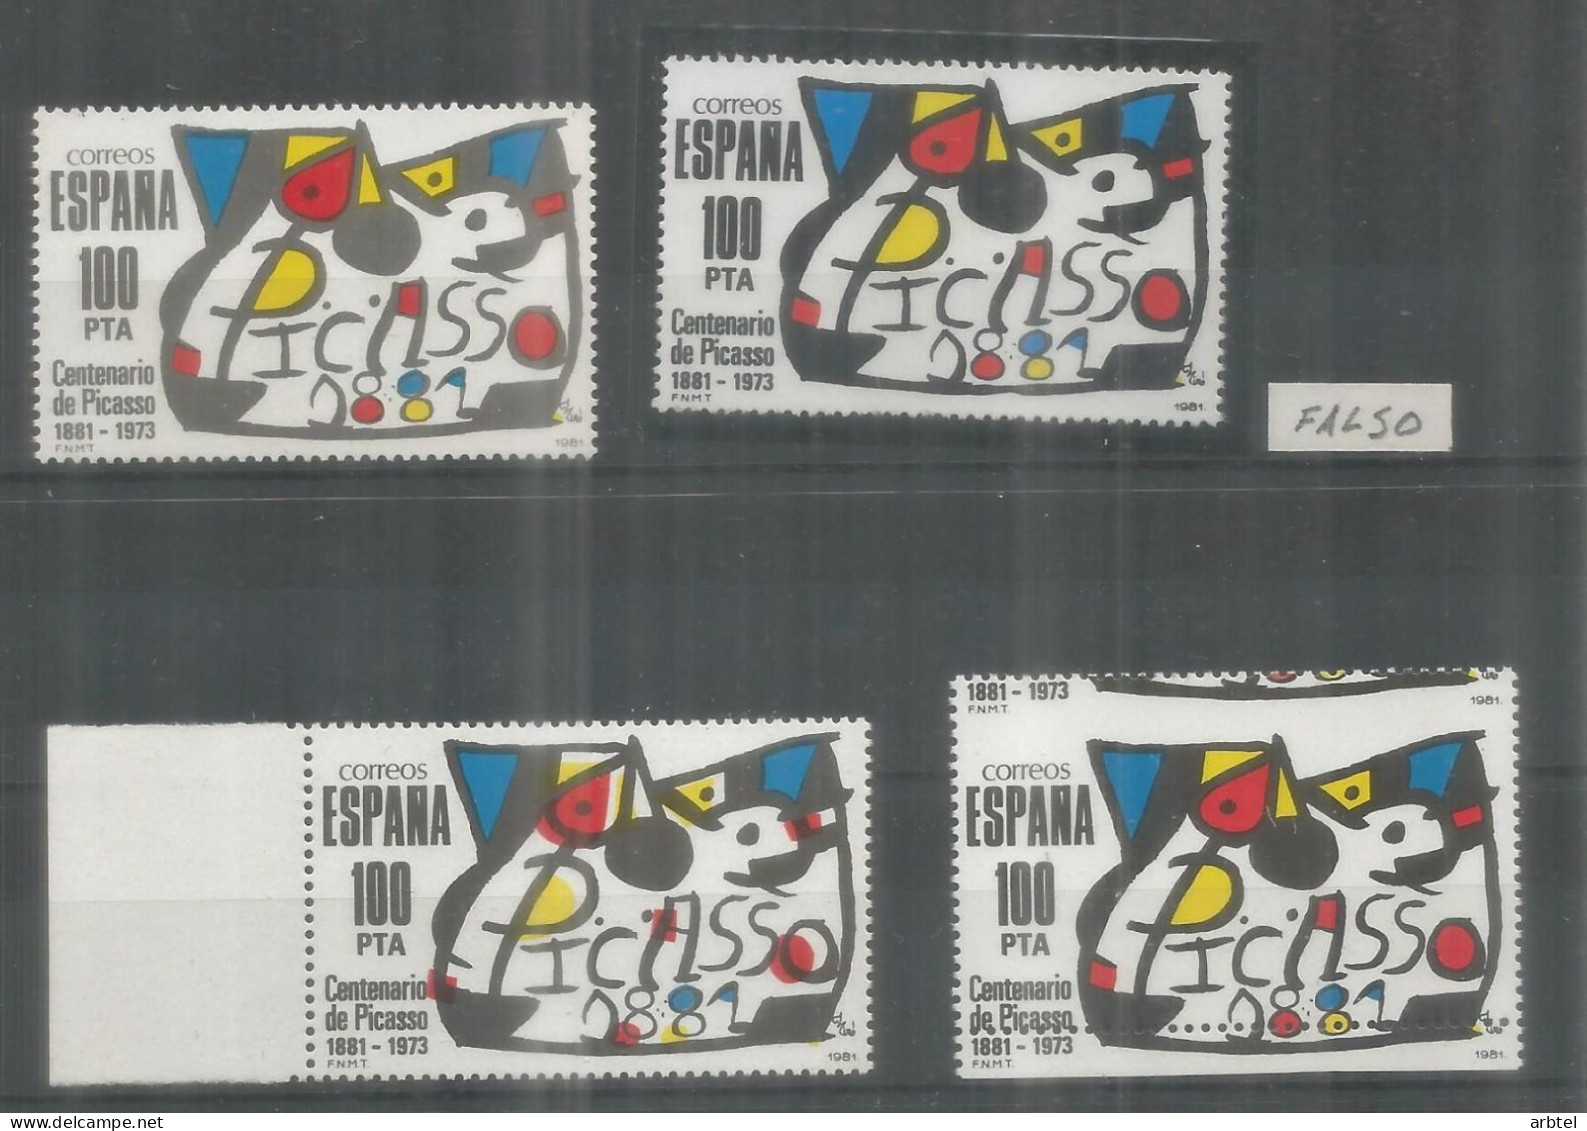 SPAIN PICASSO STAMPS ONE GREY INSTEAD BLACK, MISPLACED COLOR, MISPERFORATION AND POSTAL FORGERY ISSUED FOR USE IN POSTAG - Picasso